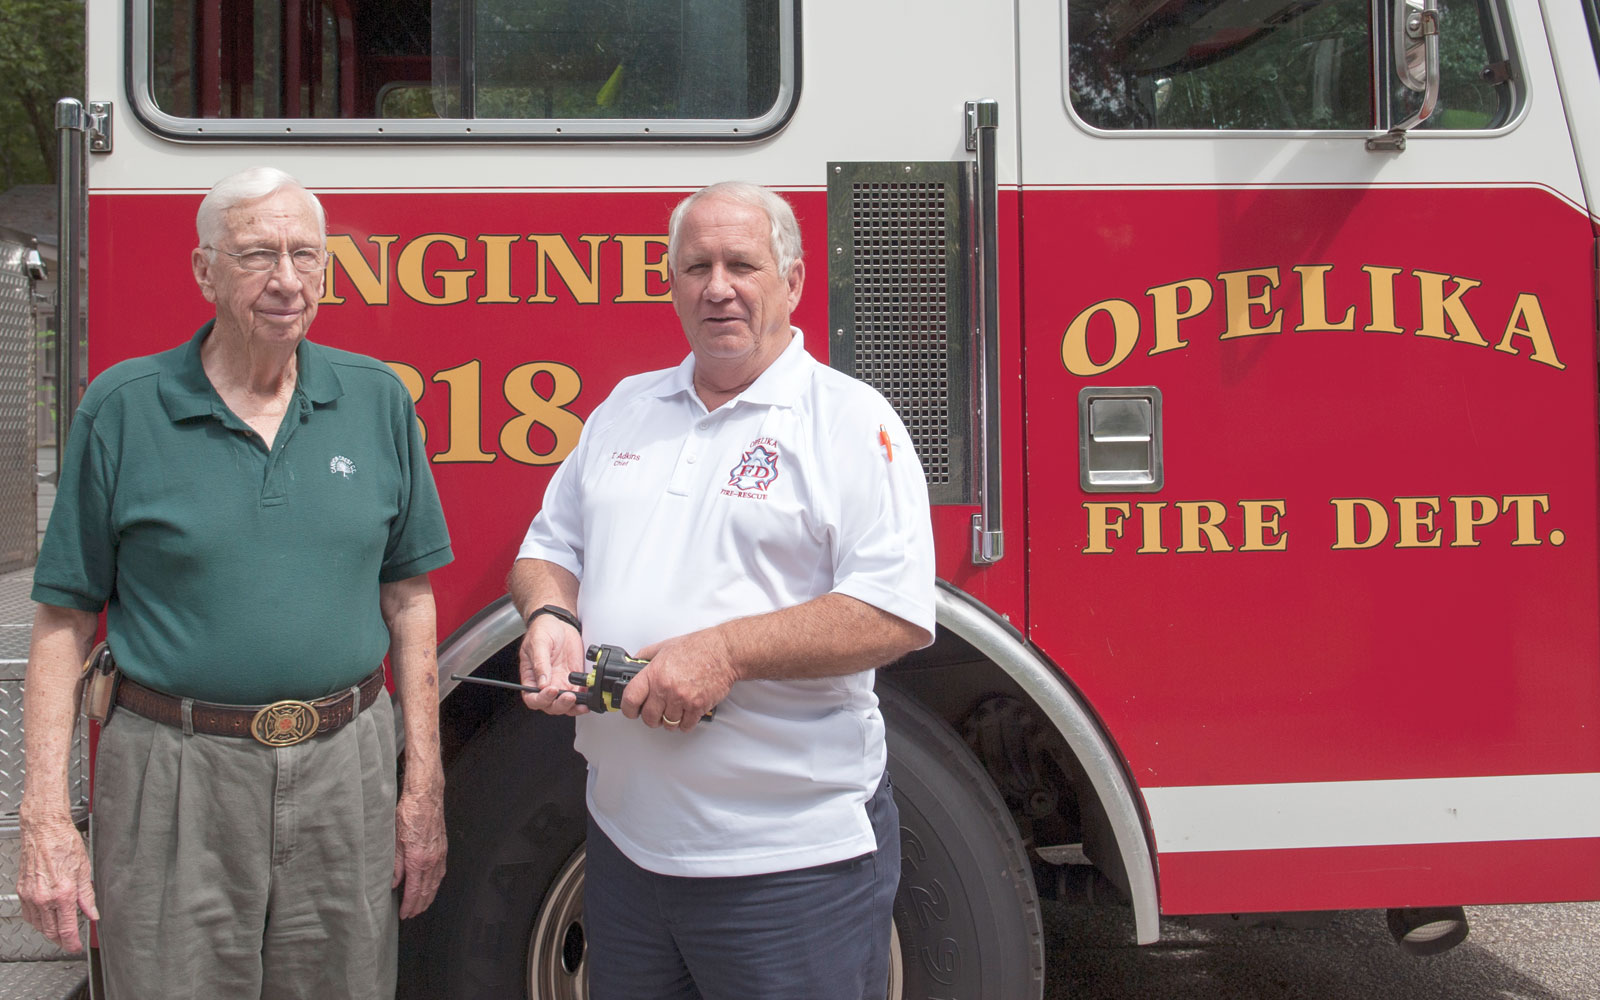 Former fire chief’s career spans 42 years